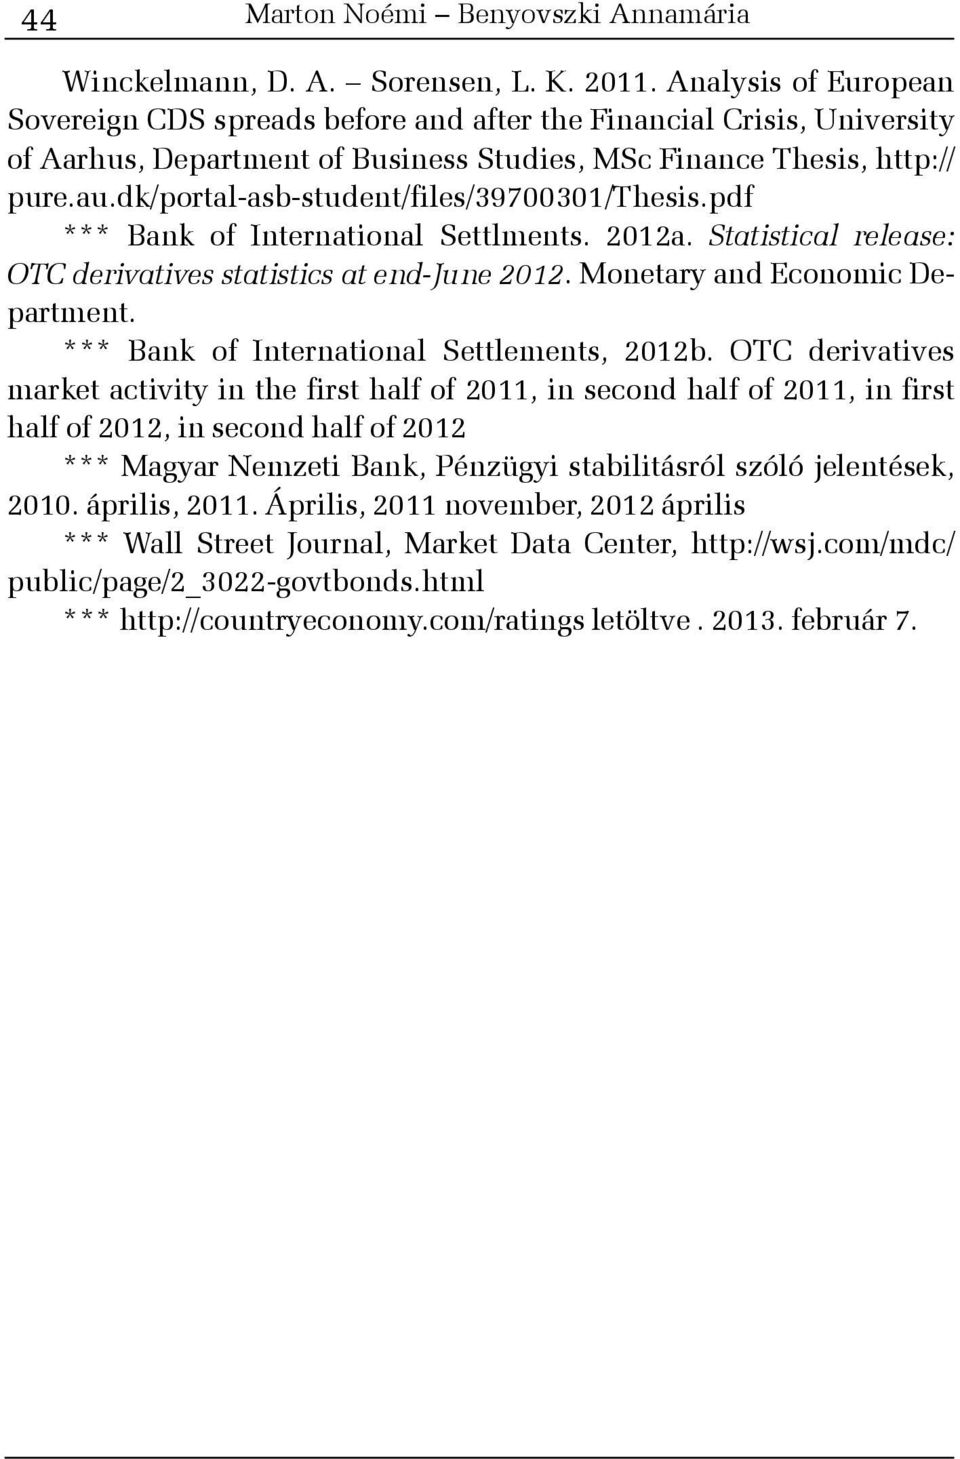 dk/portal-asb-student/files/39700301/thesis.pdf *** Bank of International Settlments. 2012a. Statistical release: OTC derivatives statistics at end-june 2012. Monetary and Economic Department.